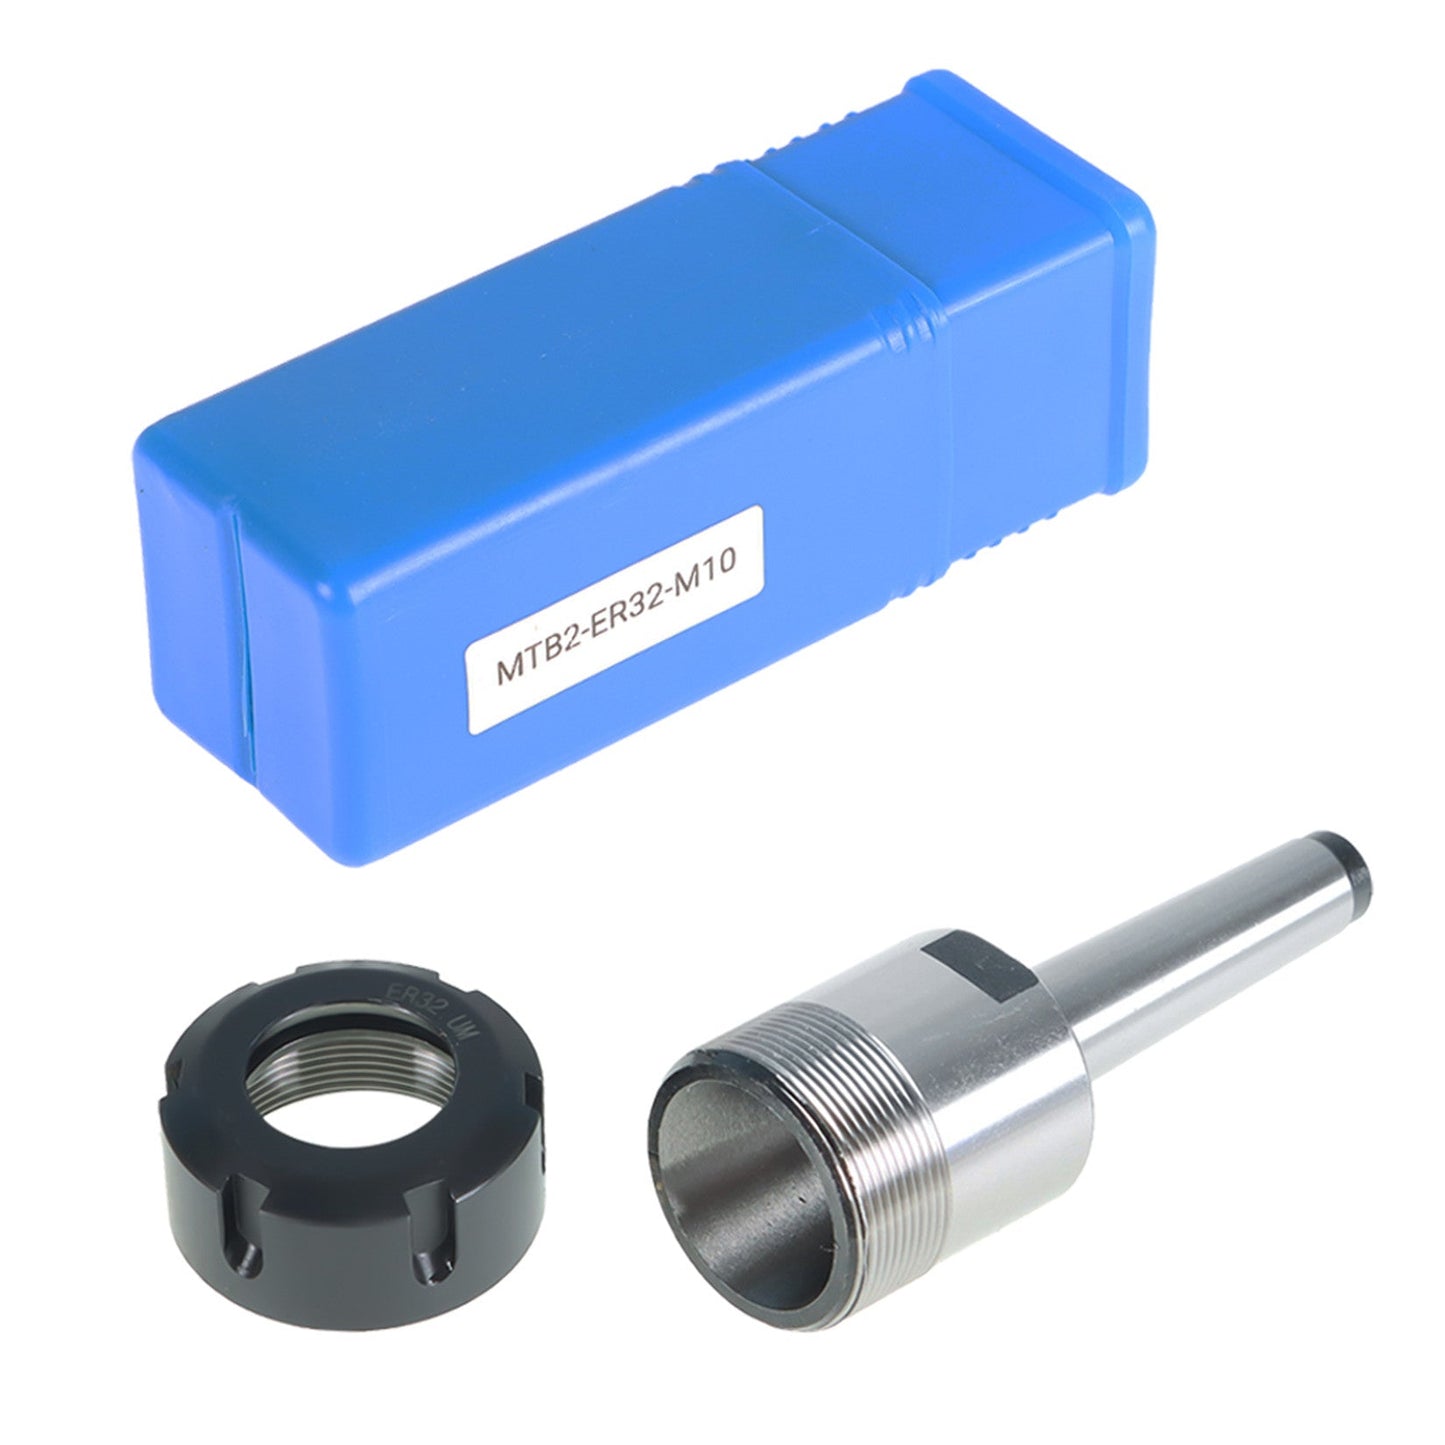 findmall MT2 ER32UM M10 Morse Cone Collet Chuck Tooling Holder Fit for CNC Engraving Machine and Milling Lathe Tool FINDMALLPARTS